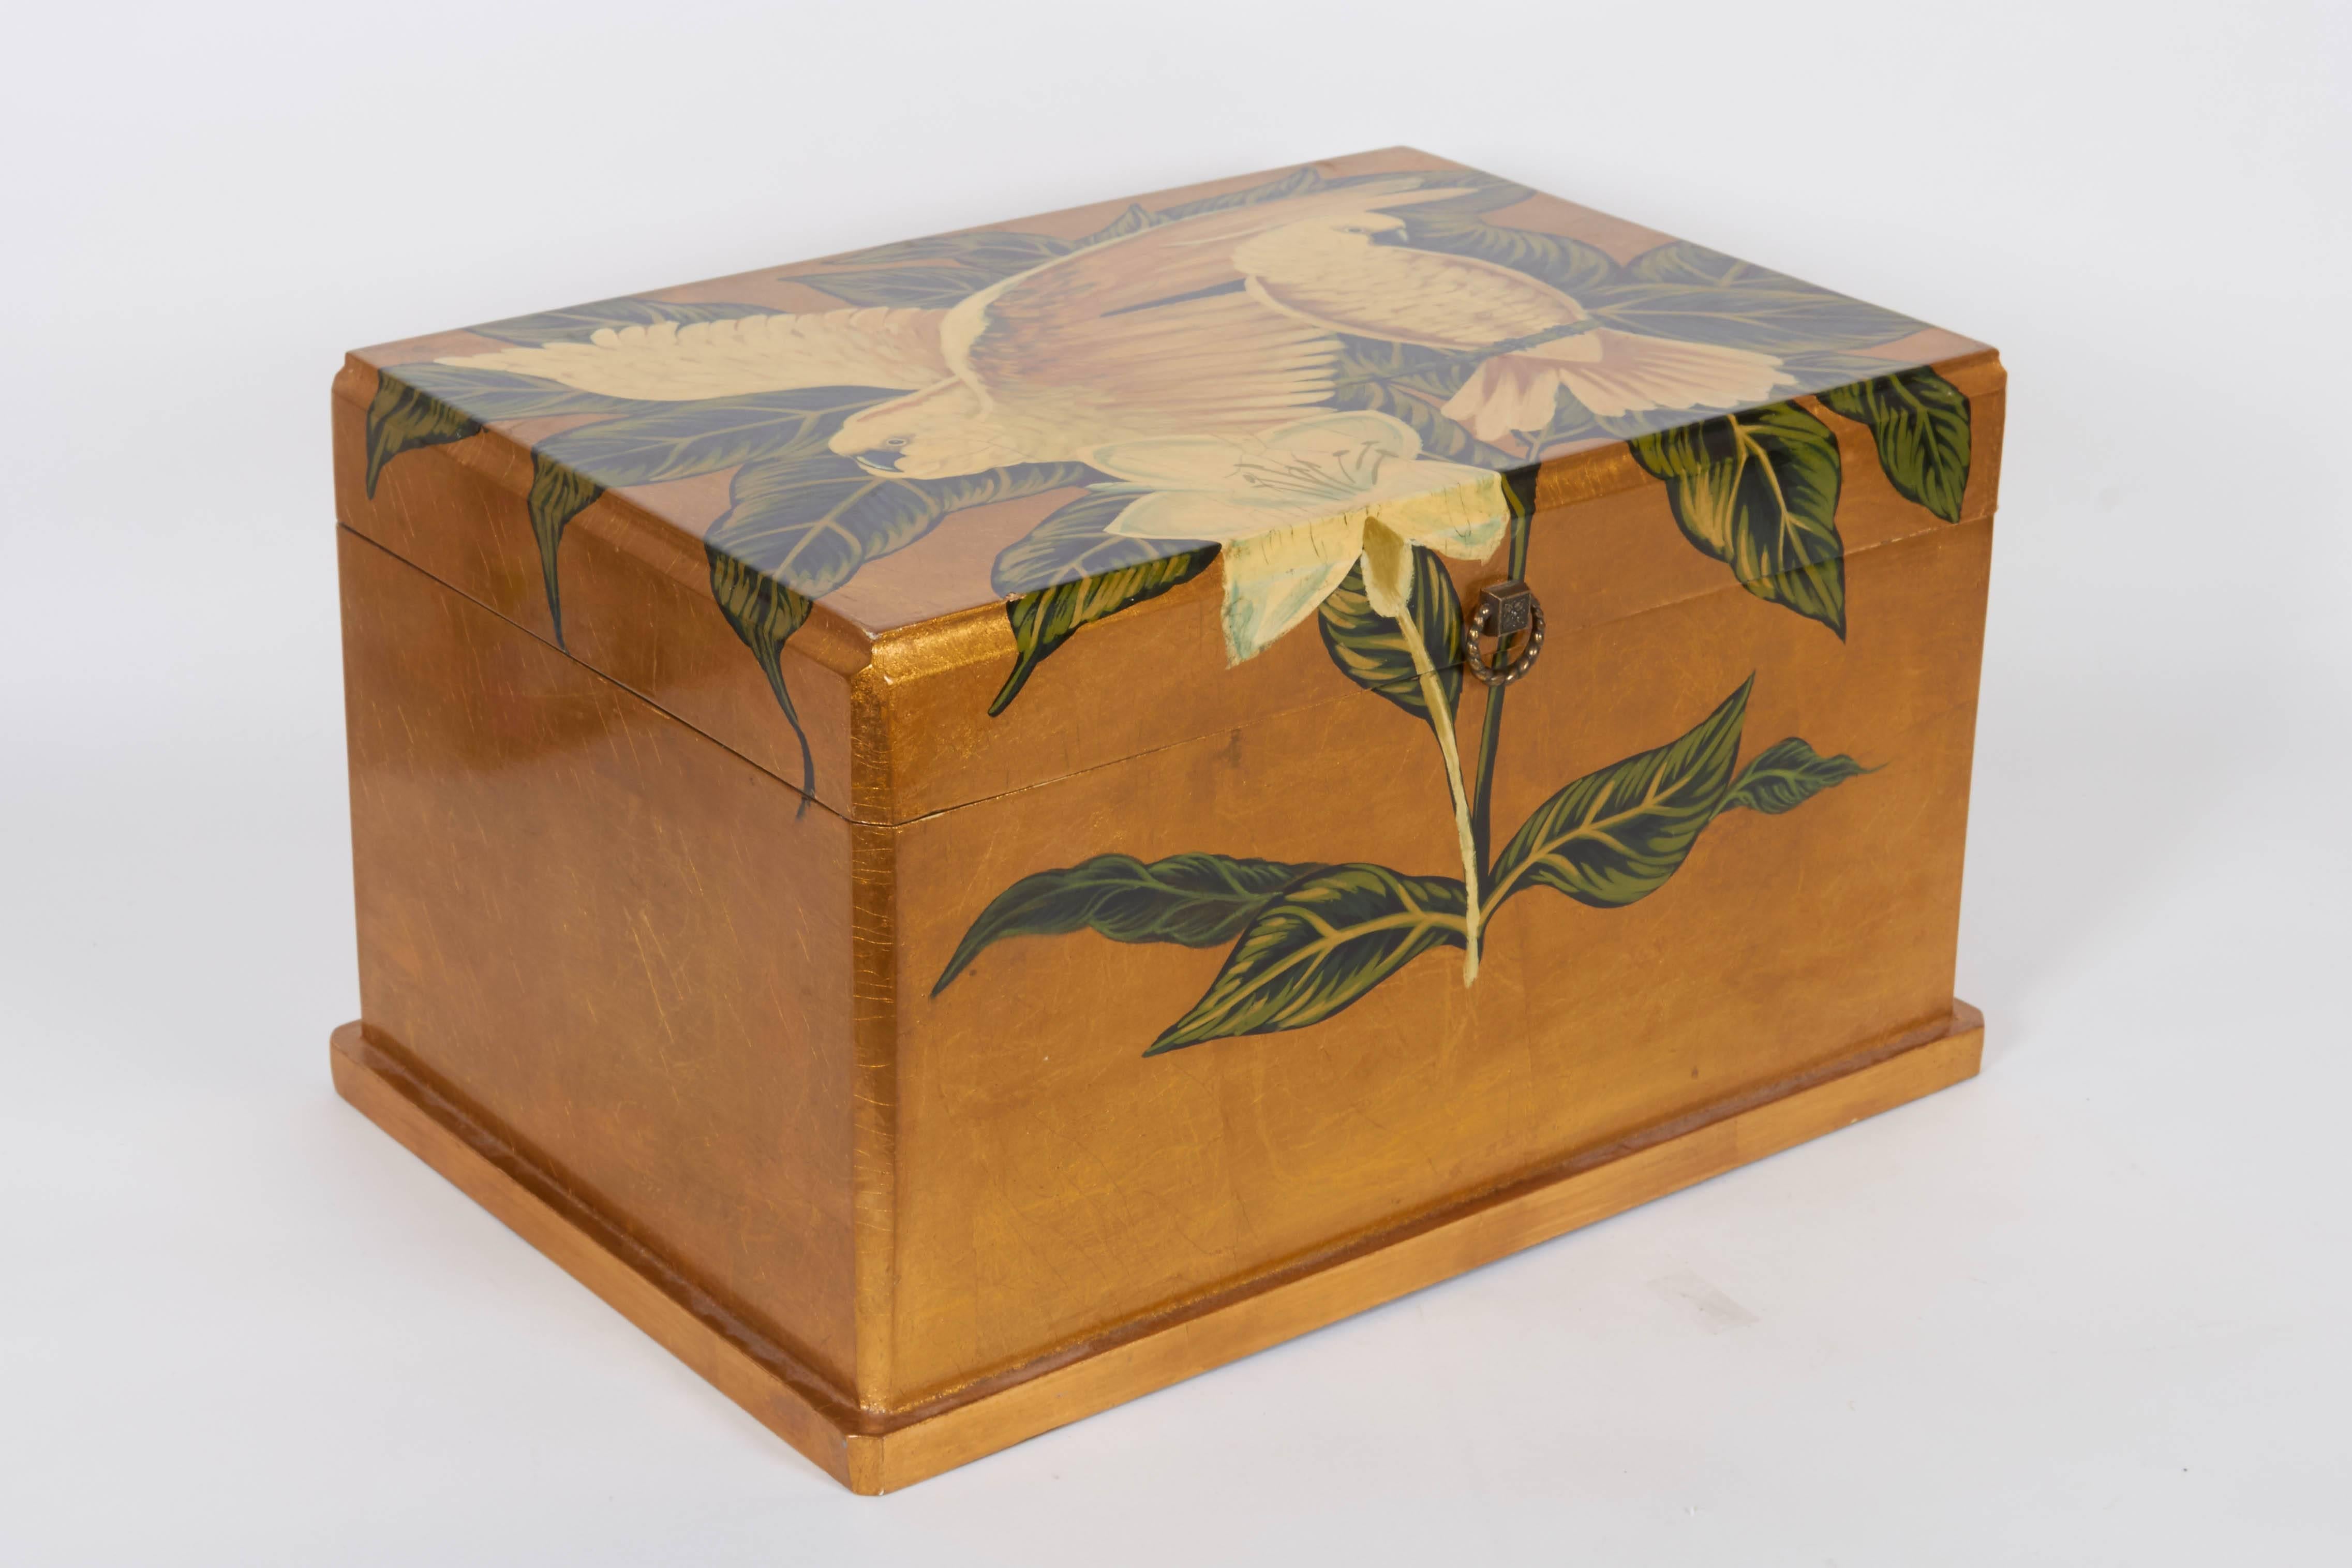 Hand-Painted Gold Leaf Jewelry Box with Cockatoos 1